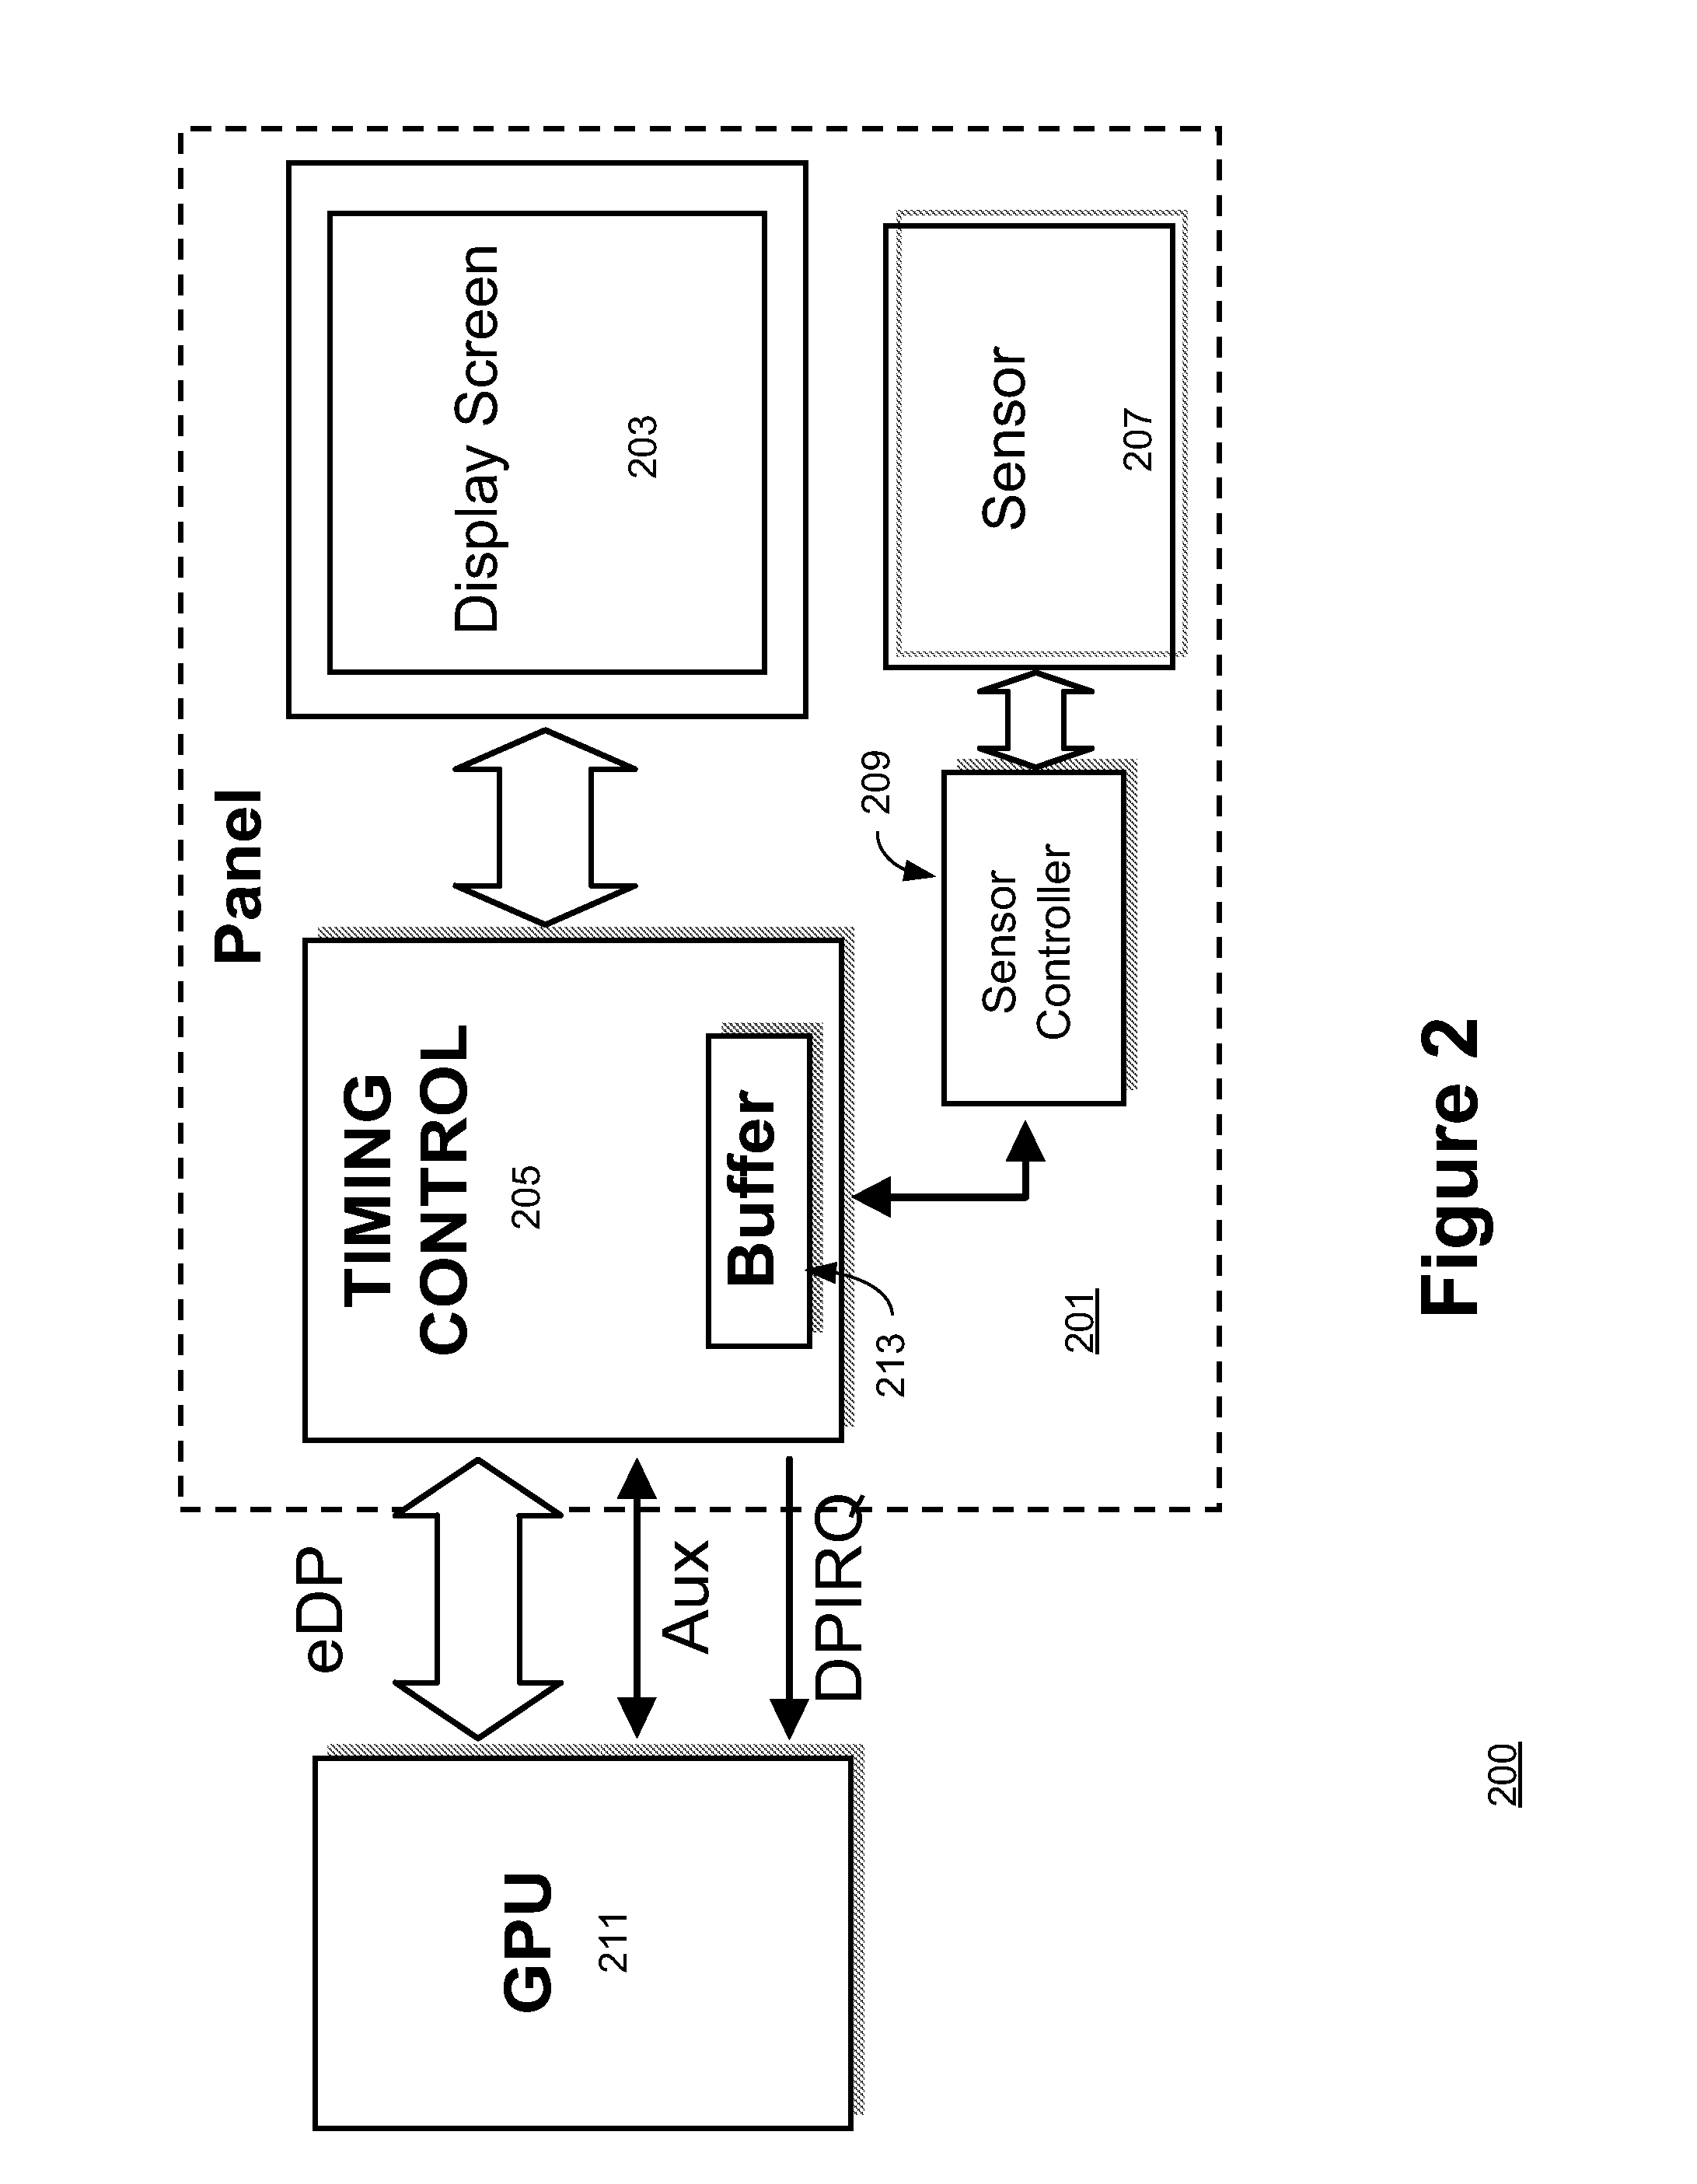 Method and apparatus for optimizing display updates on an interactive display device